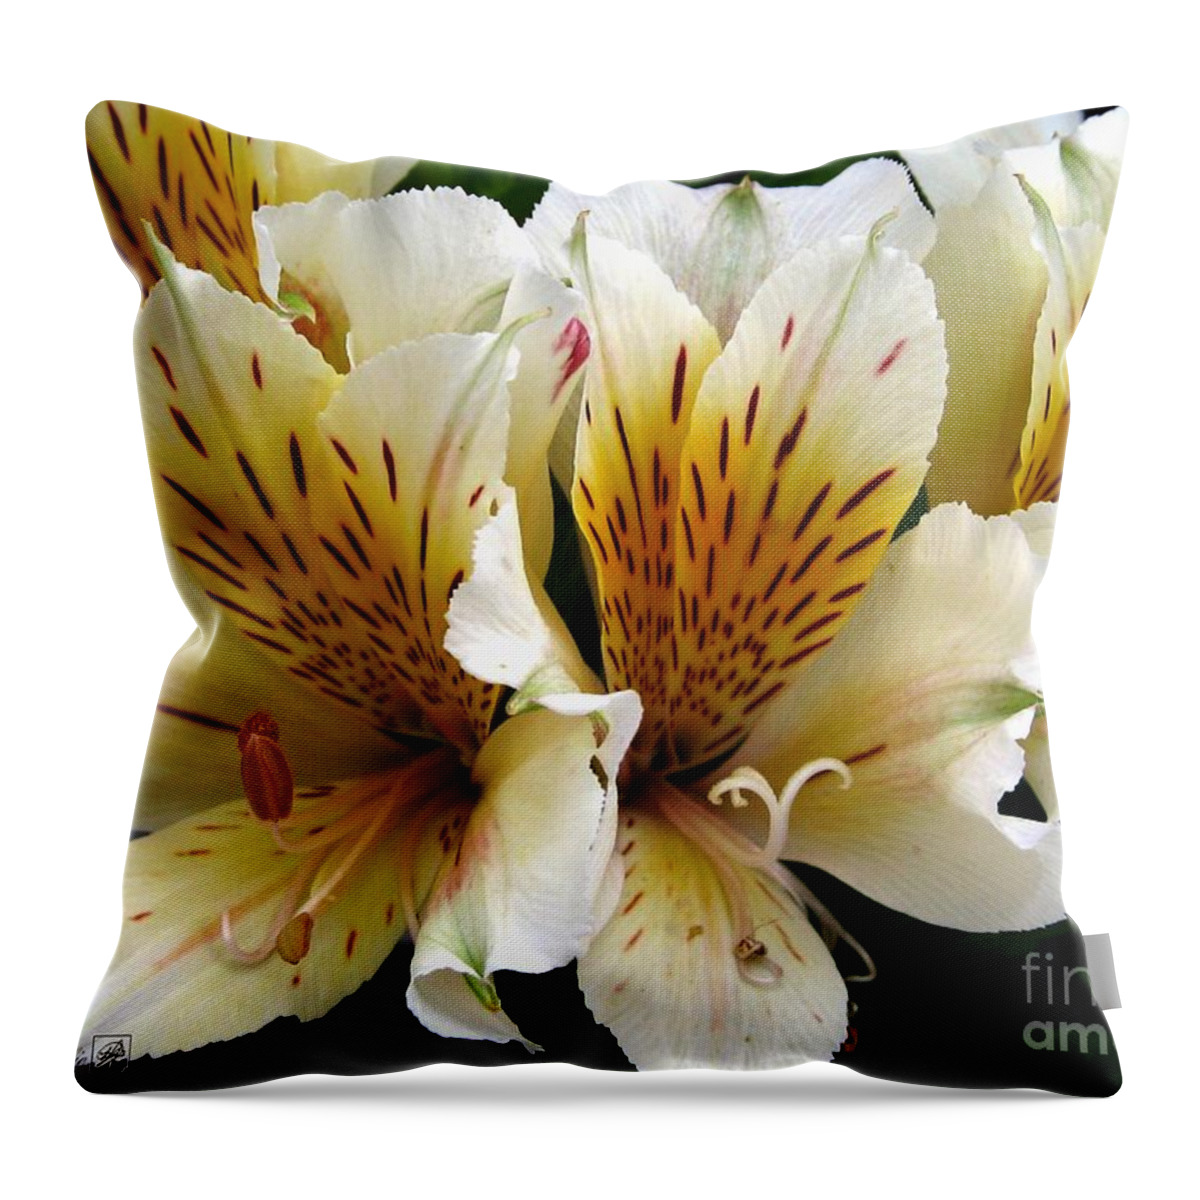 Mccombie Throw Pillow featuring the photograph Princess Lily named Marilene Staprilene #4 by J McCombie